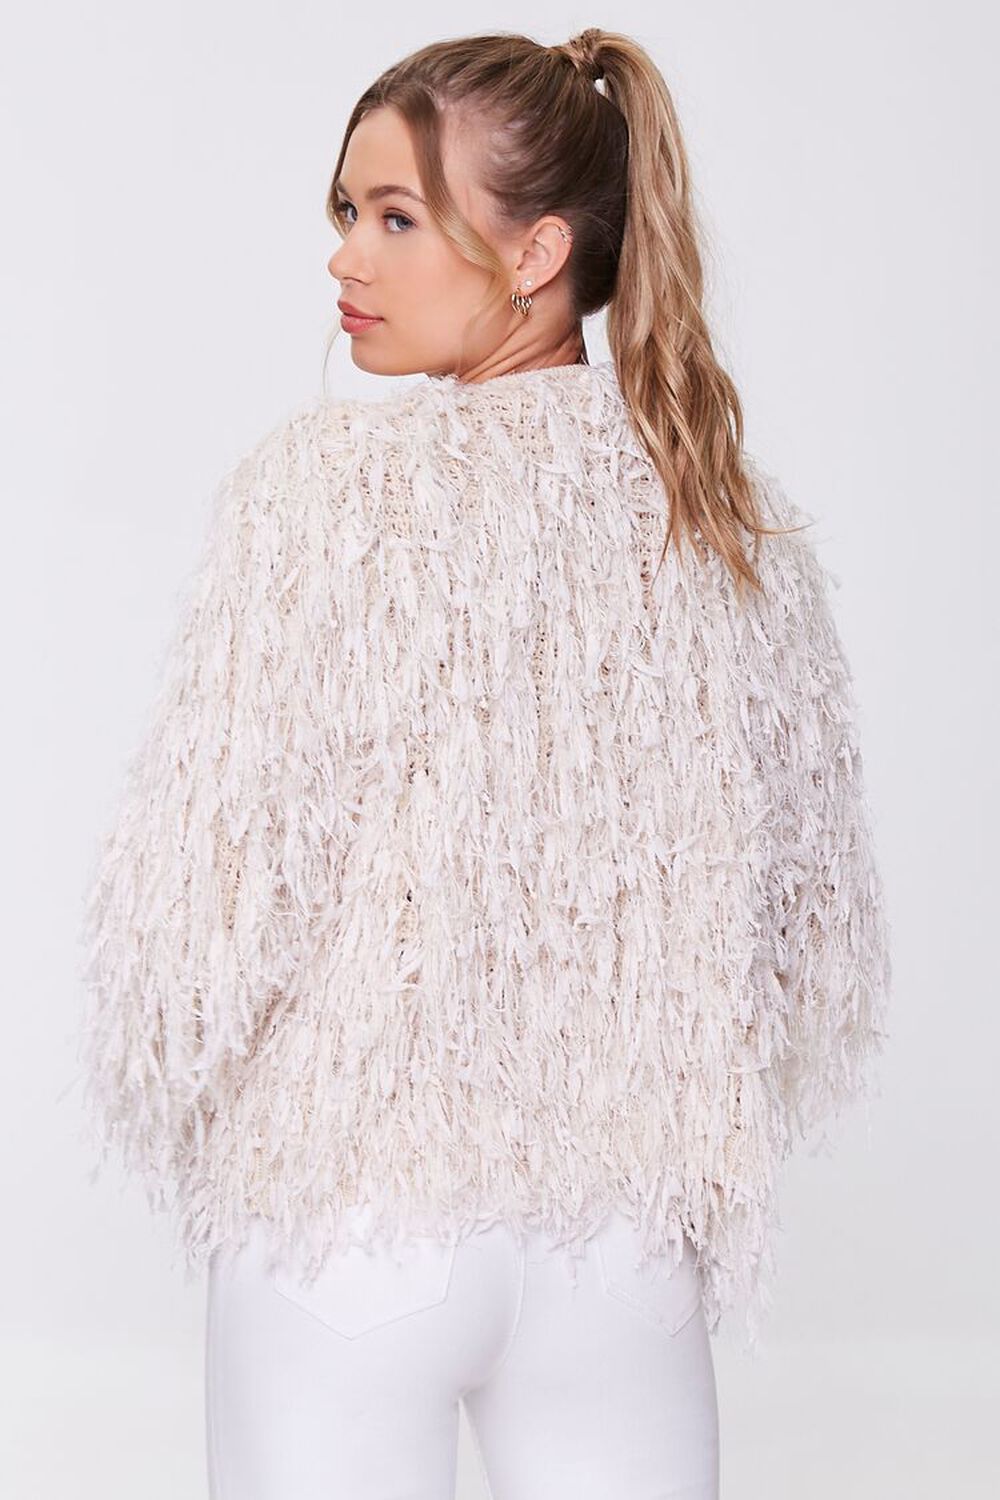 CREAM Shaggy Open-Front Cardigan Sweater, image 3